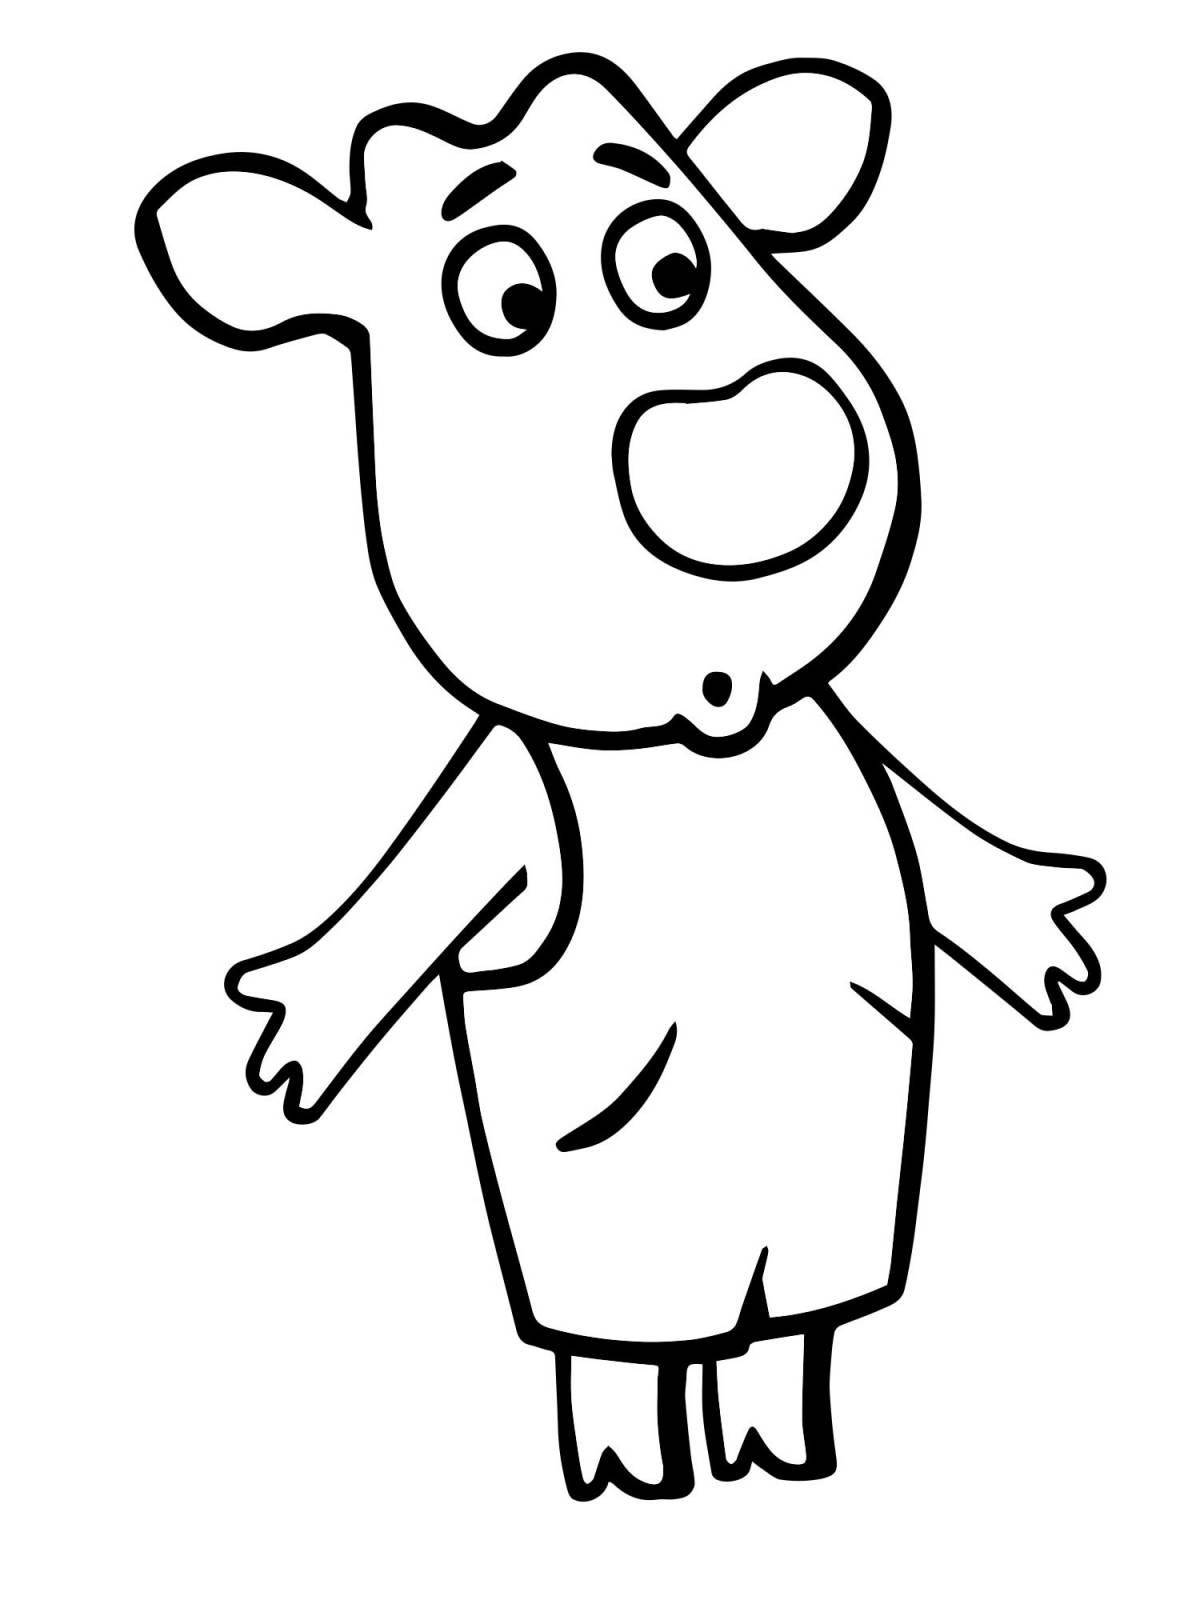 Coloring book playful bull for children